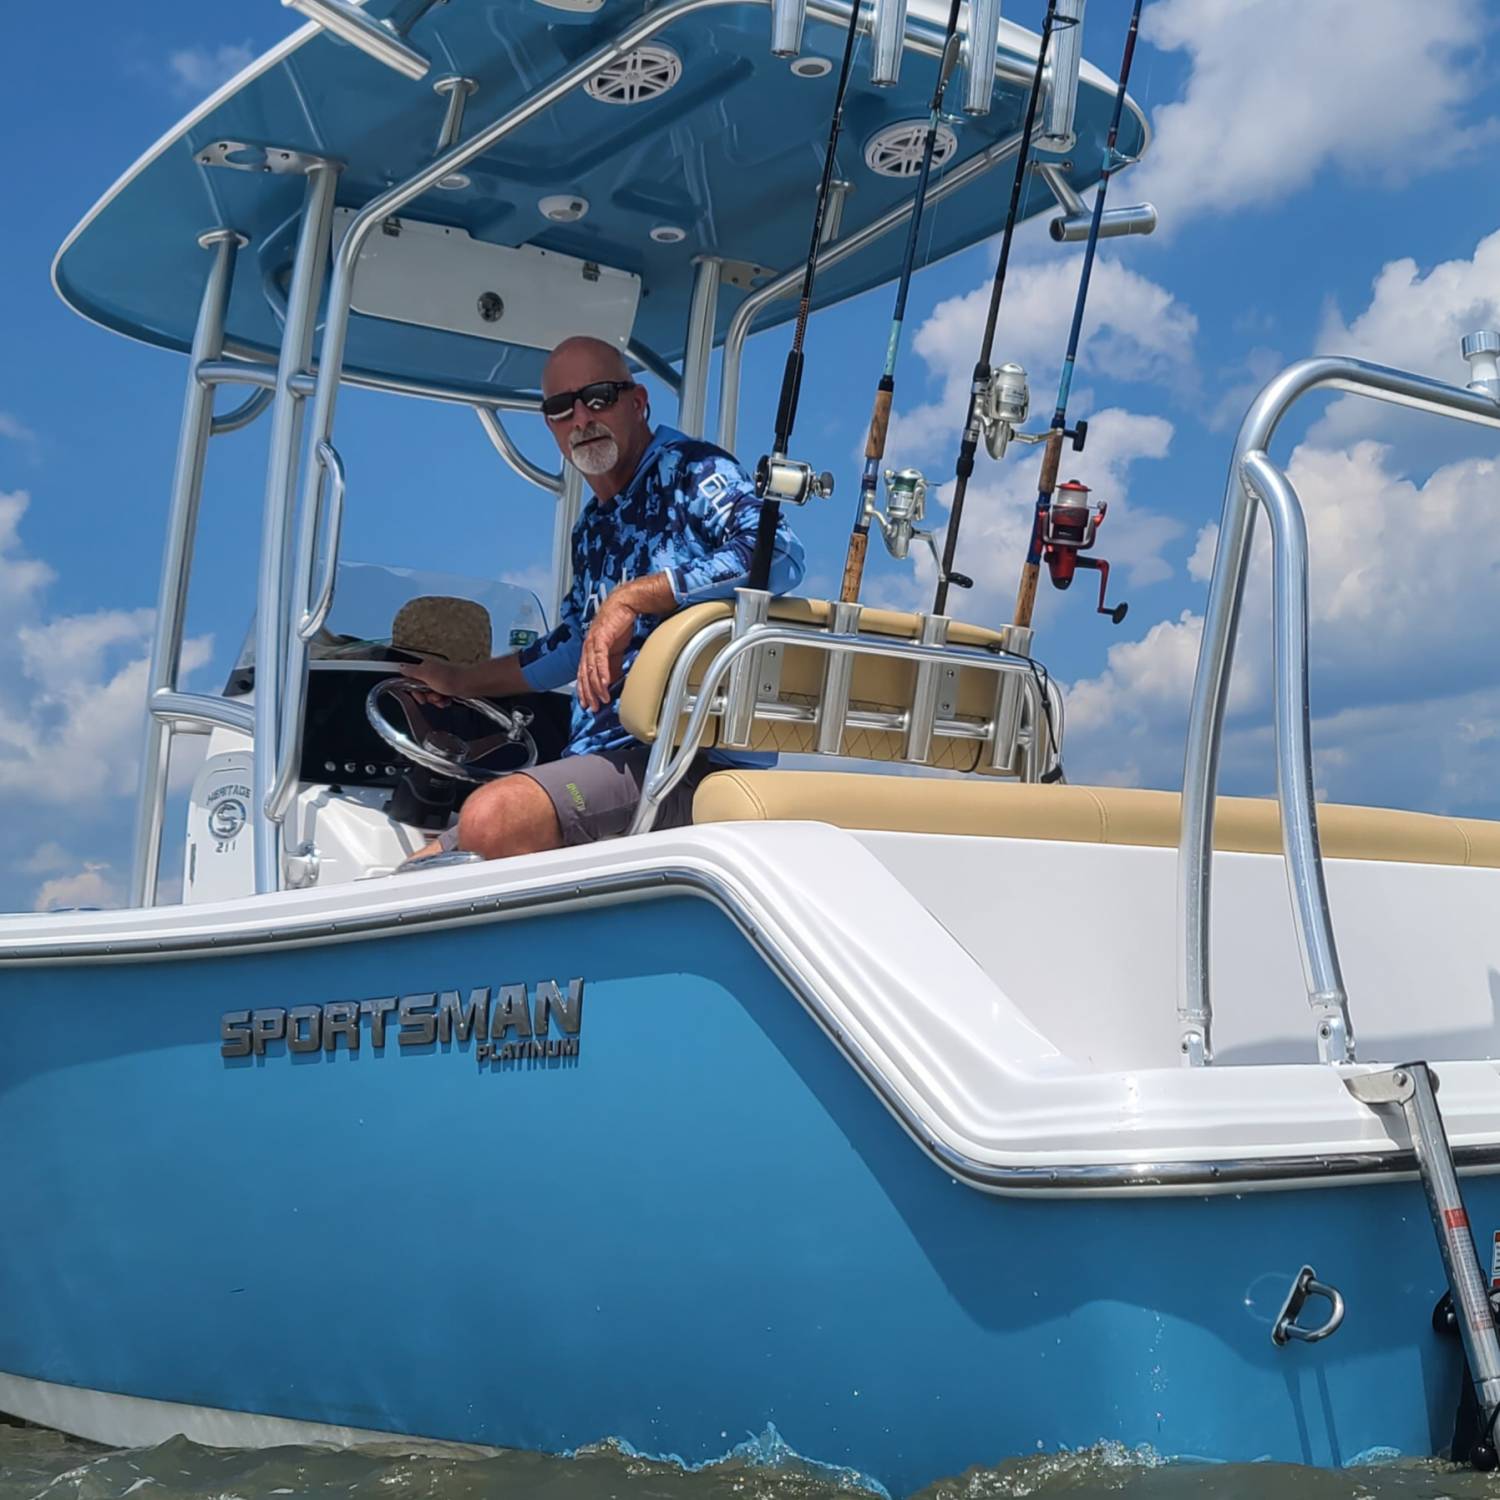 Title: Another beautiful Charleston Day - On board their Sportsman Heritage 211 Center Console - Location: Charleston Harbor. Participating in the Photo Contest #SportsmanSeptember2021